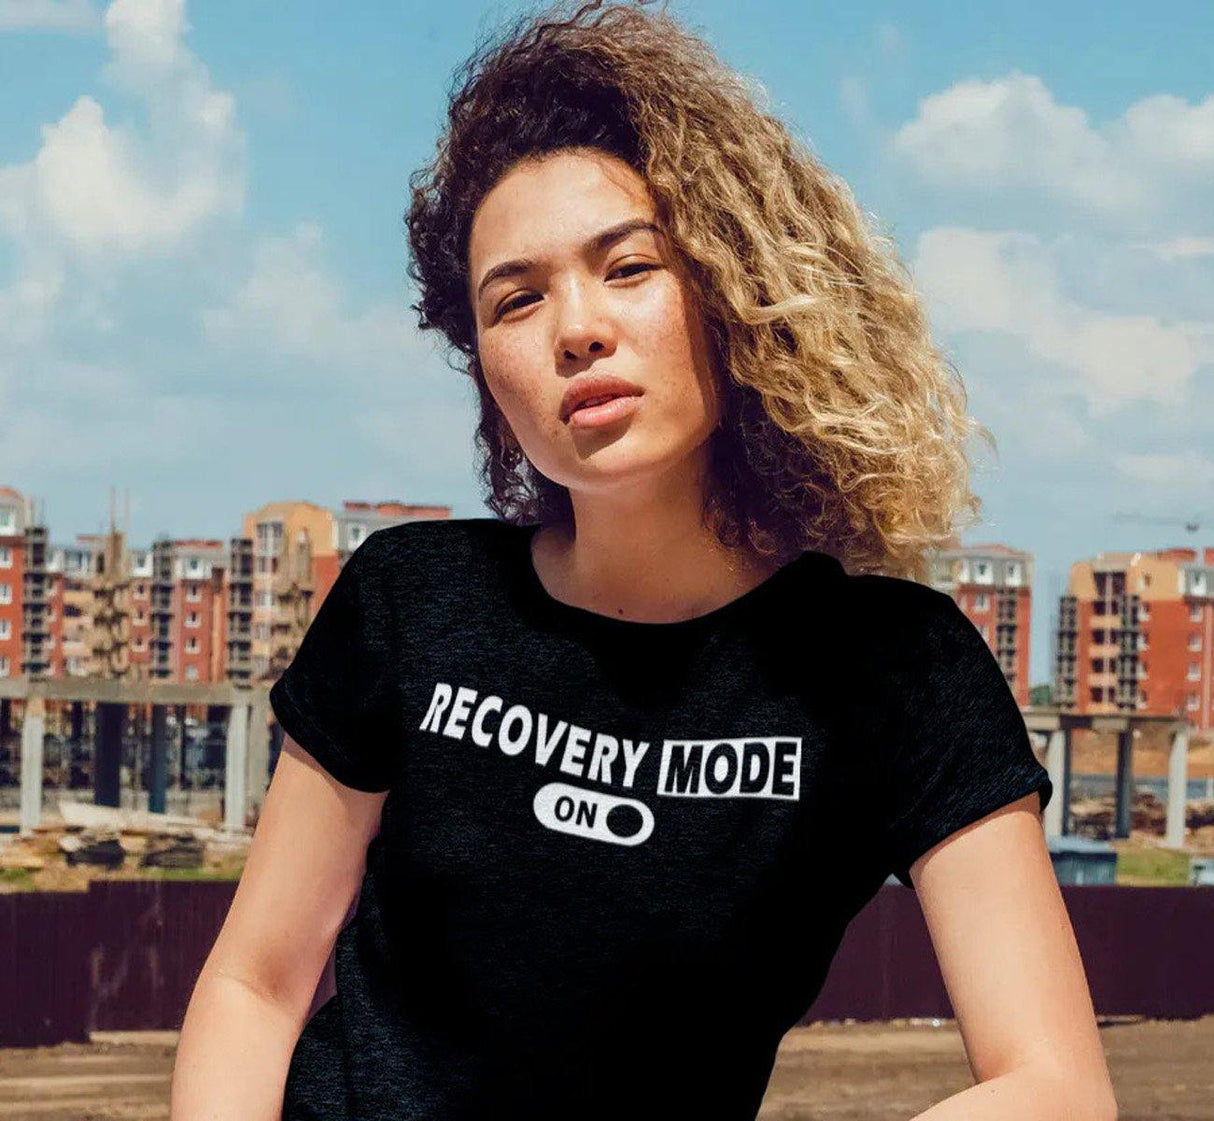 ldTs- Recover Mode On - Ladies T's - nawears